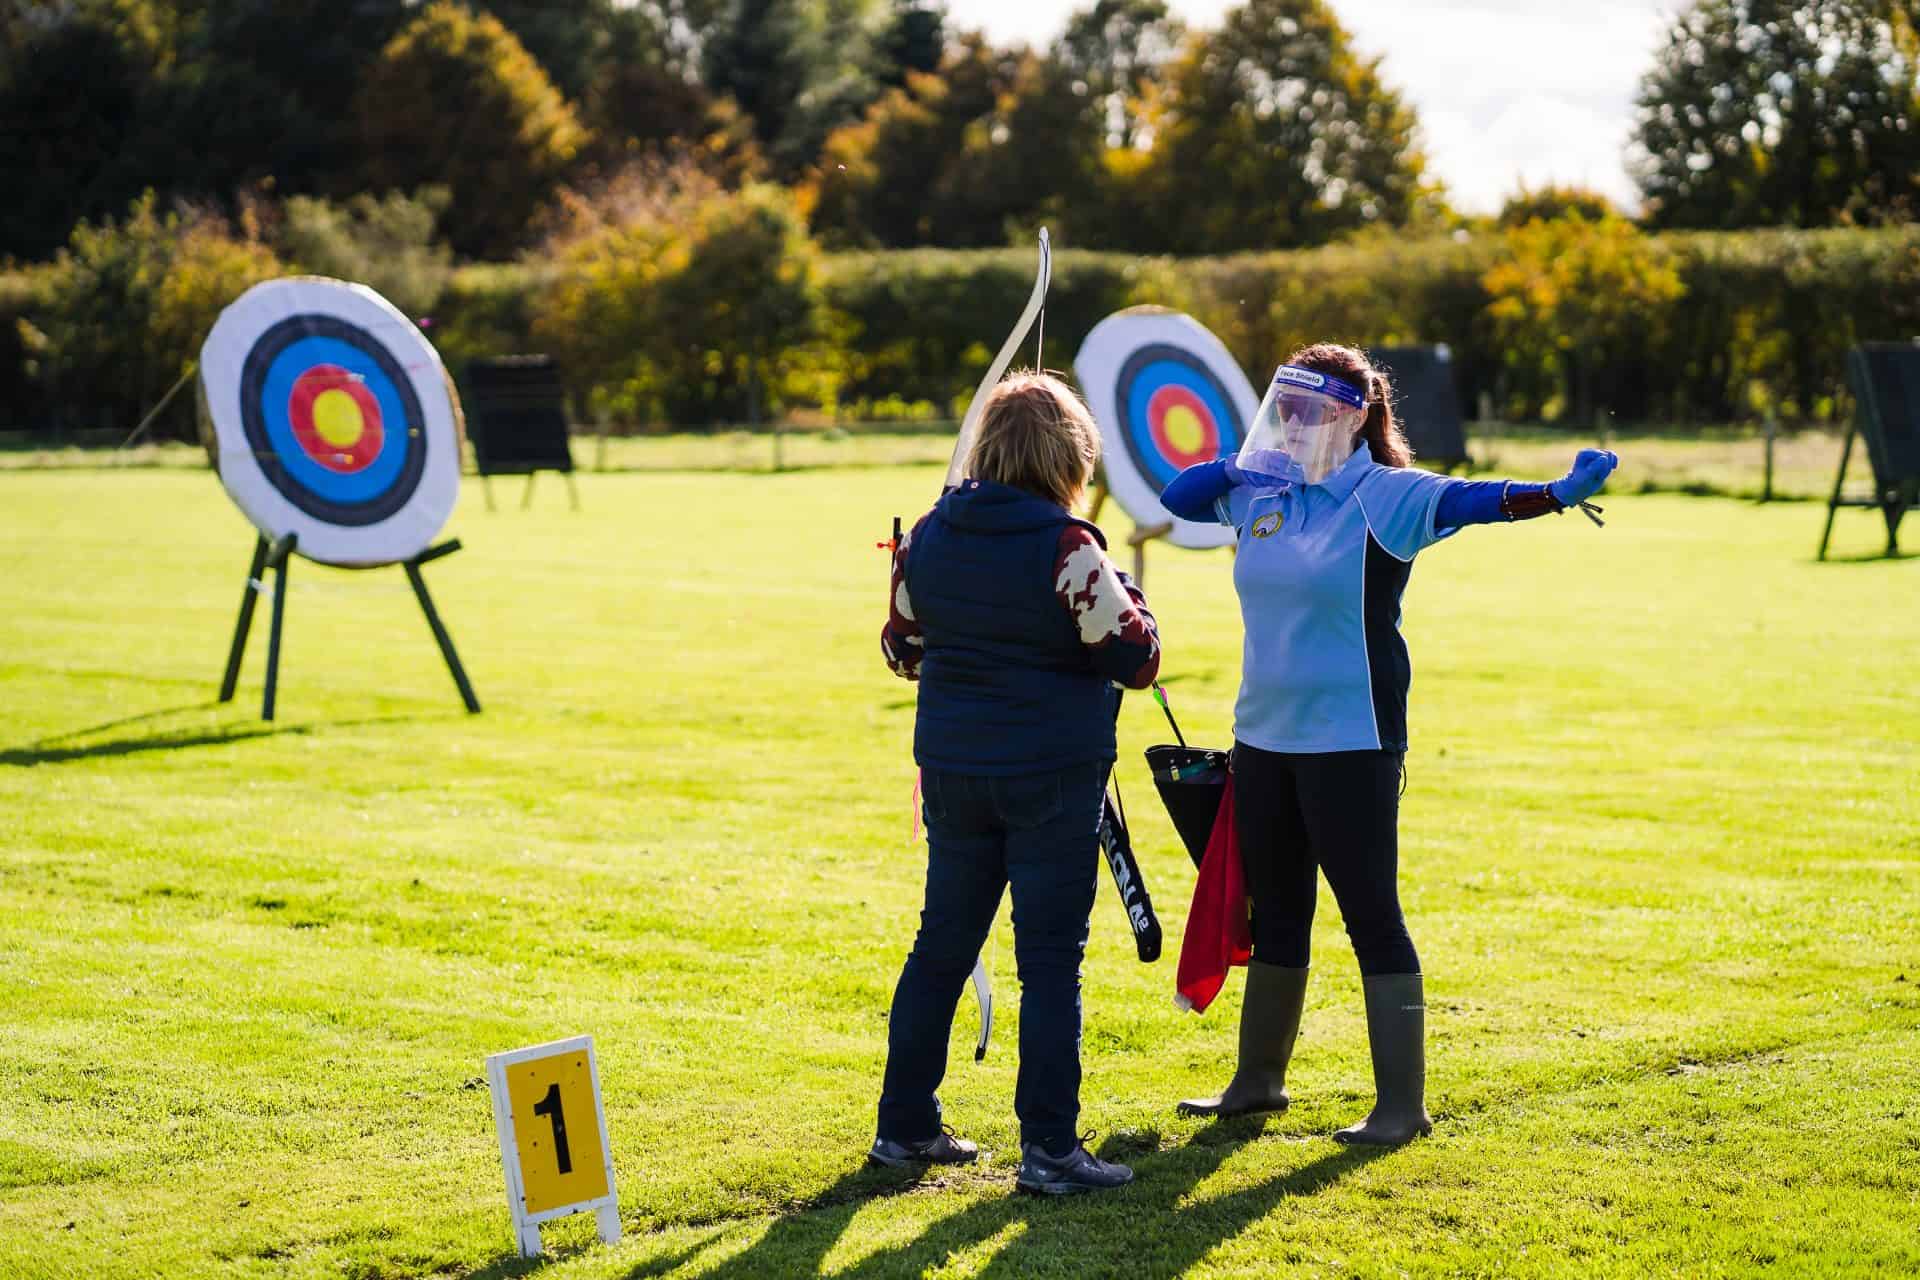 Archery clubs: here are some ways to thank your brilliant volunteers!